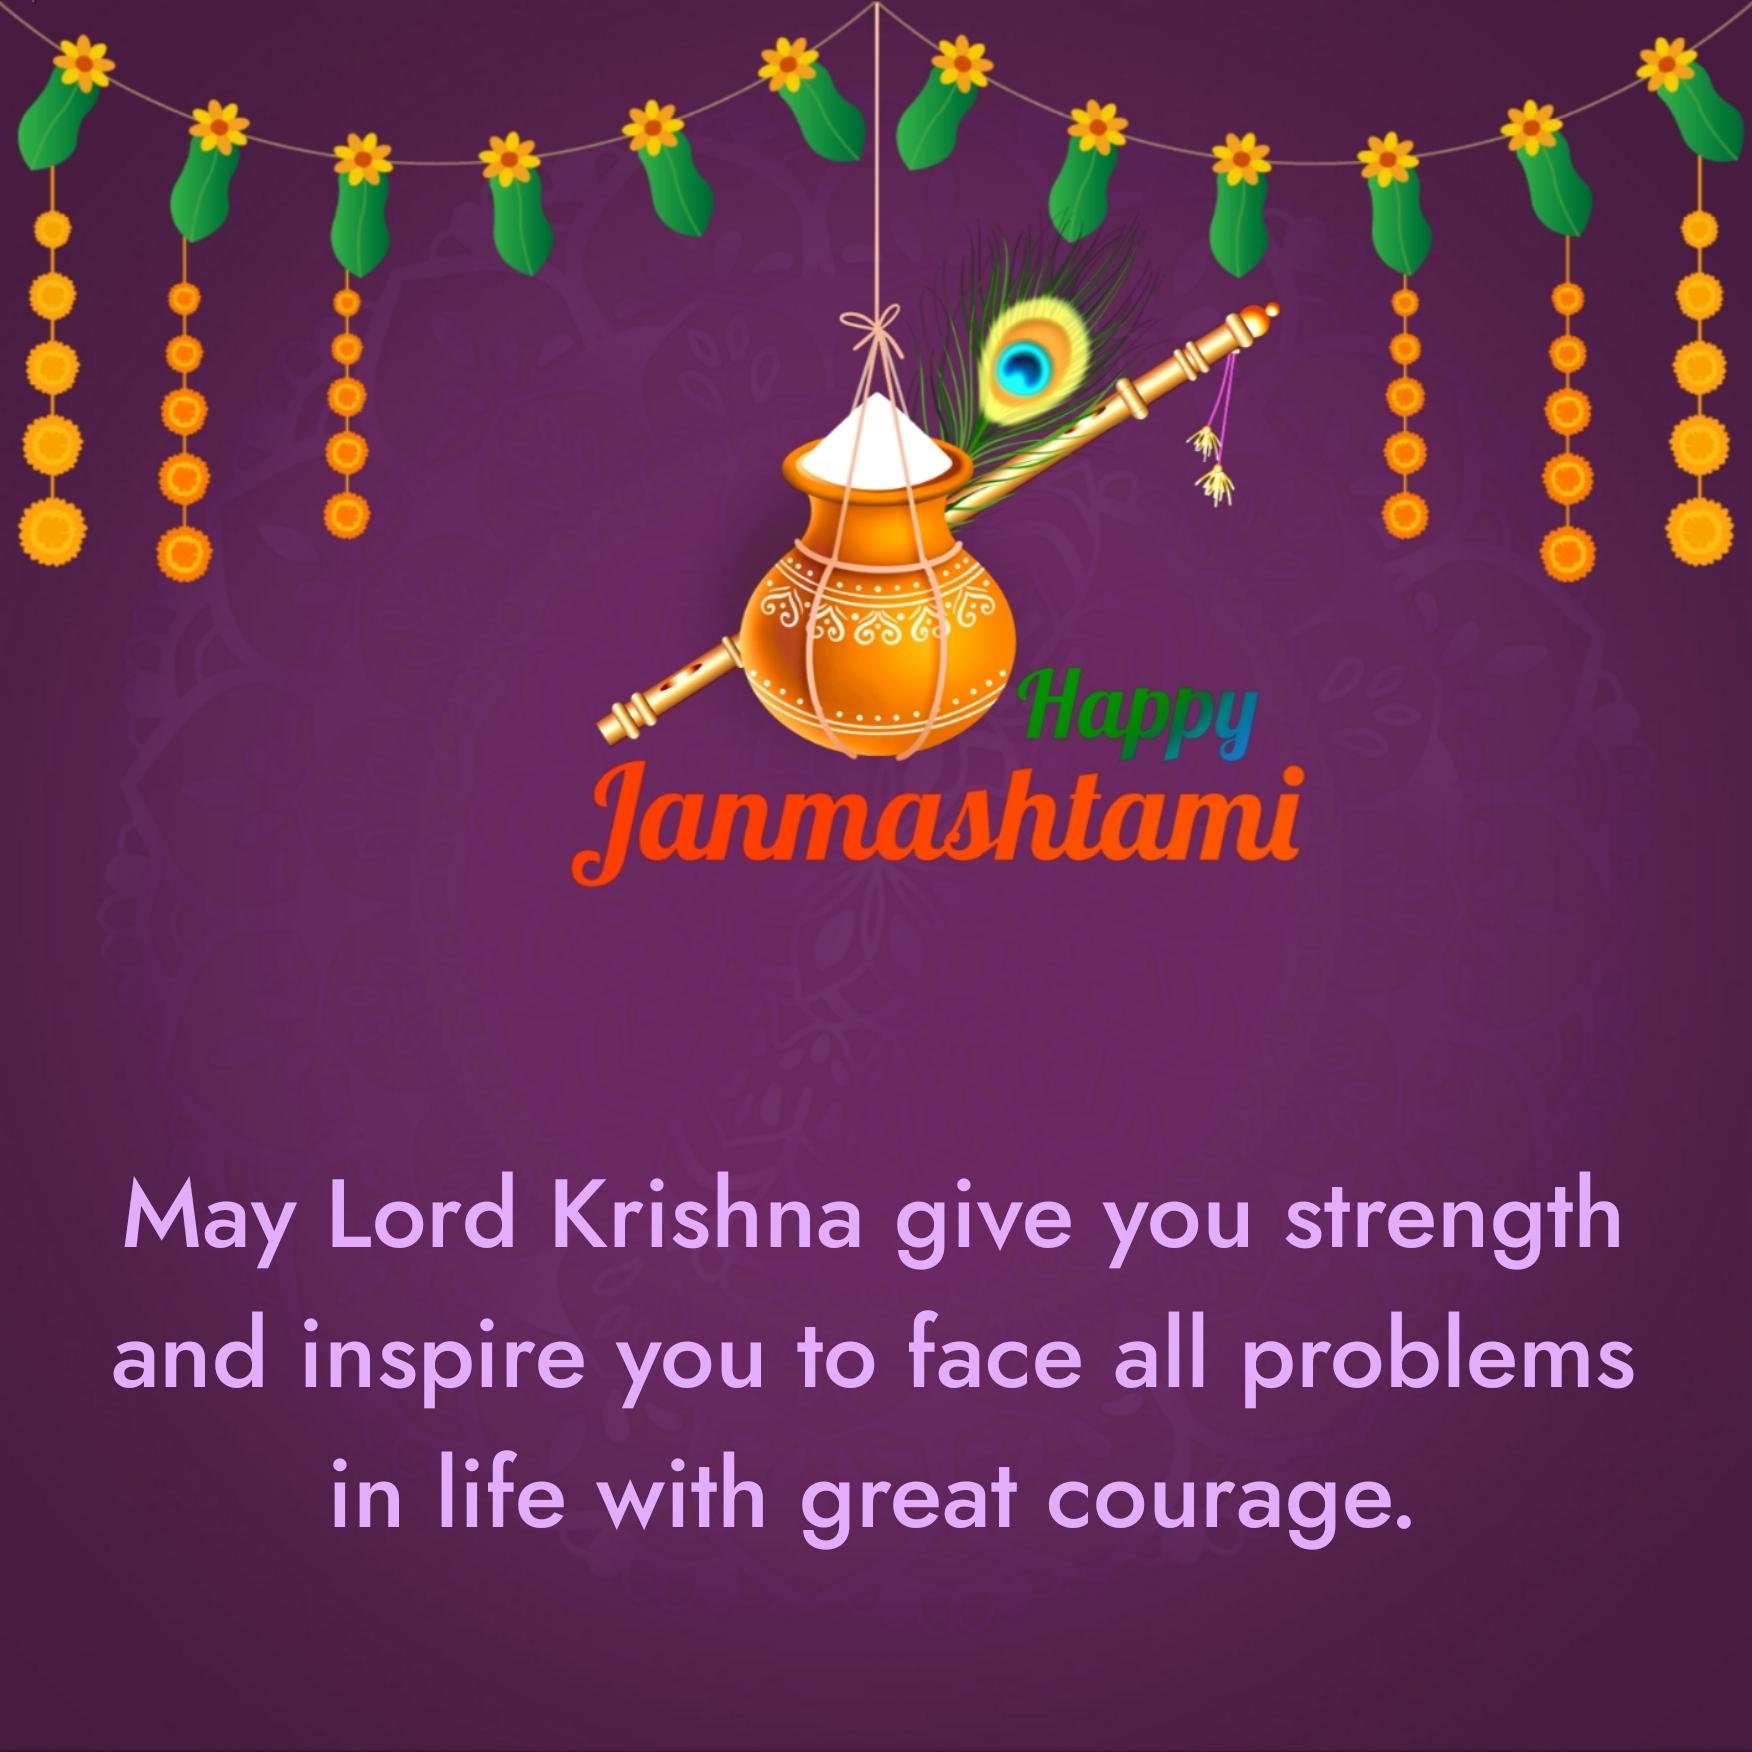 May Lord Krishna give you strength and inspire you